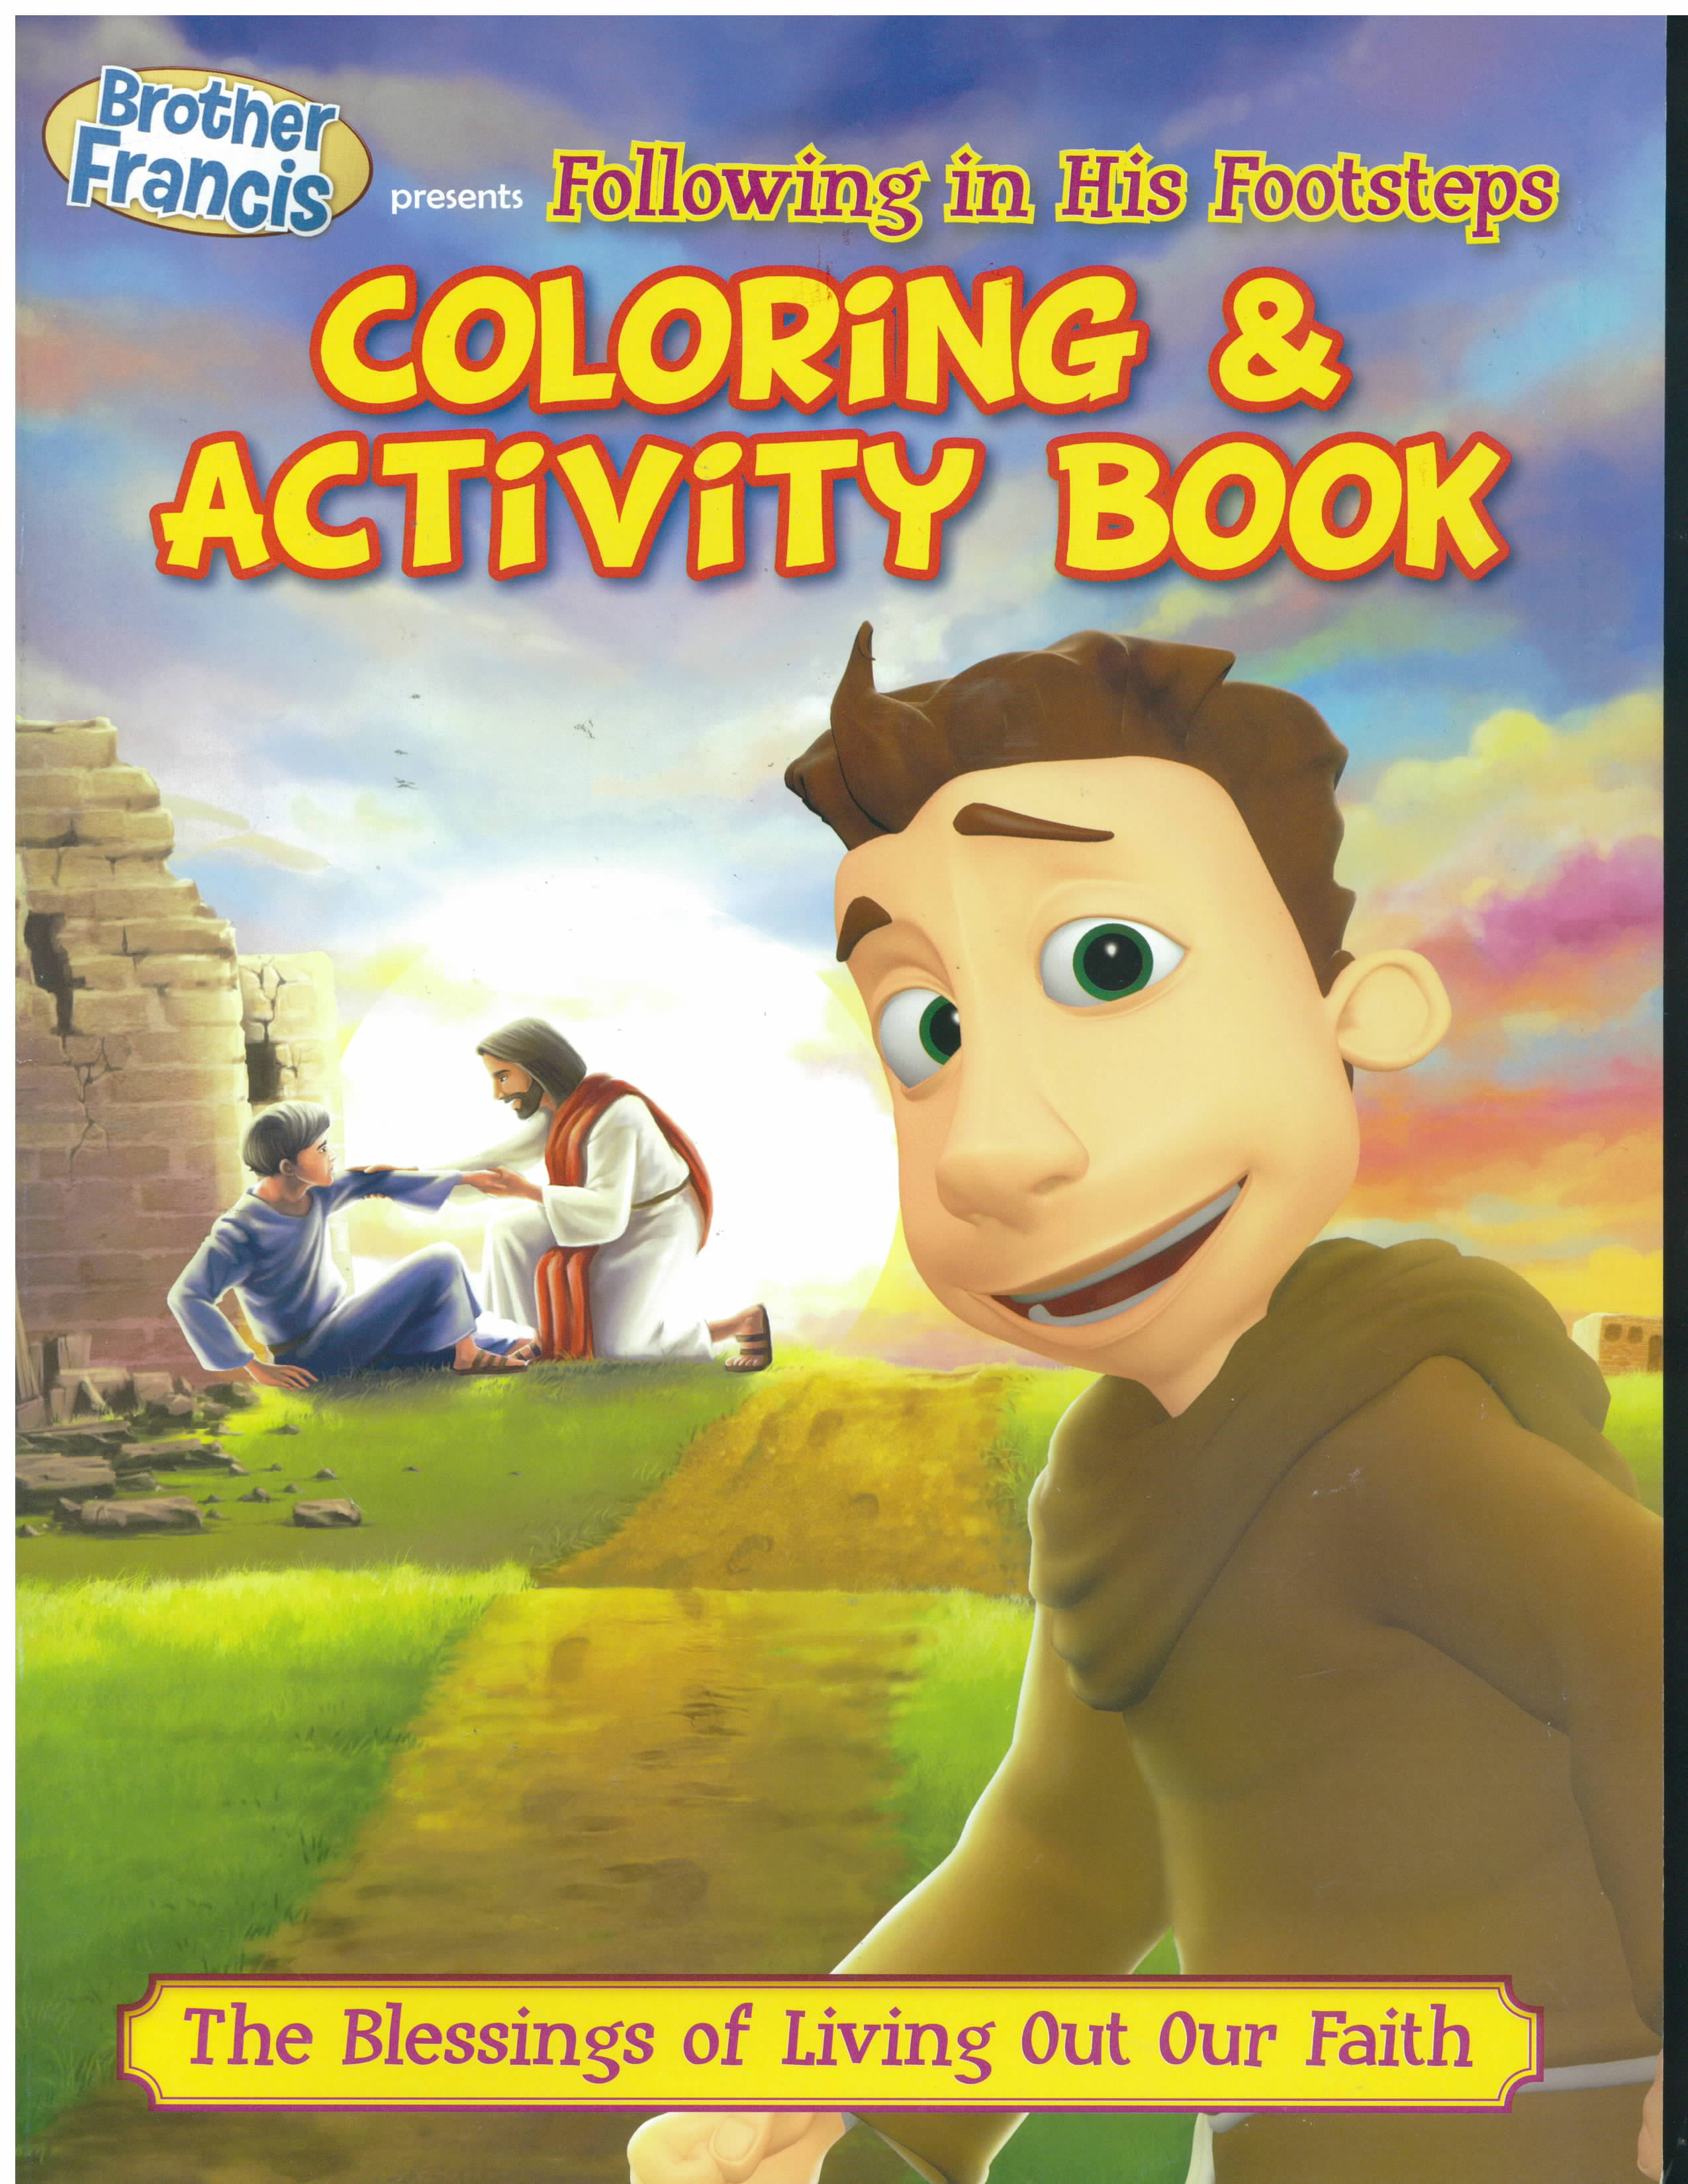 Following in His Footsteps Coloring Book and Activity Book-BF09-CB